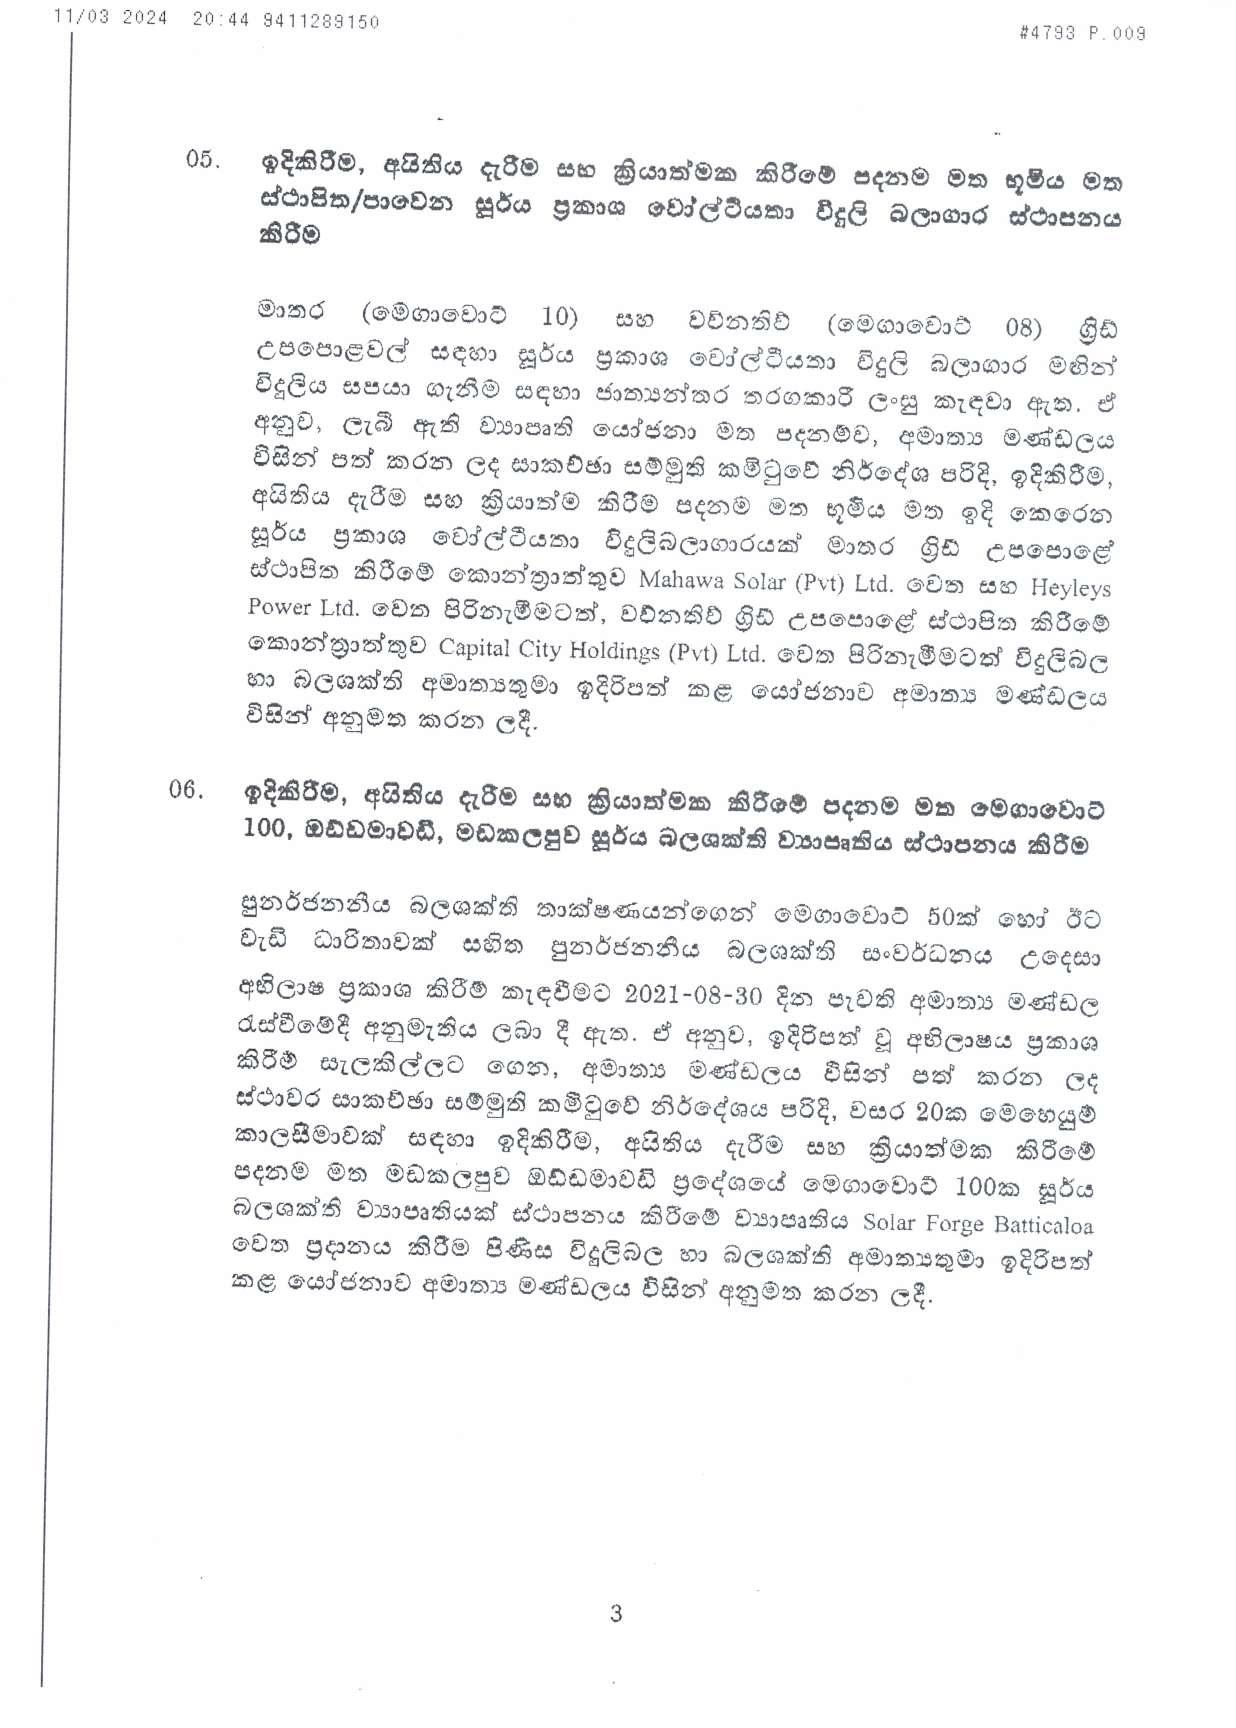 Cabinet Decision on 11.03.2024 page 003